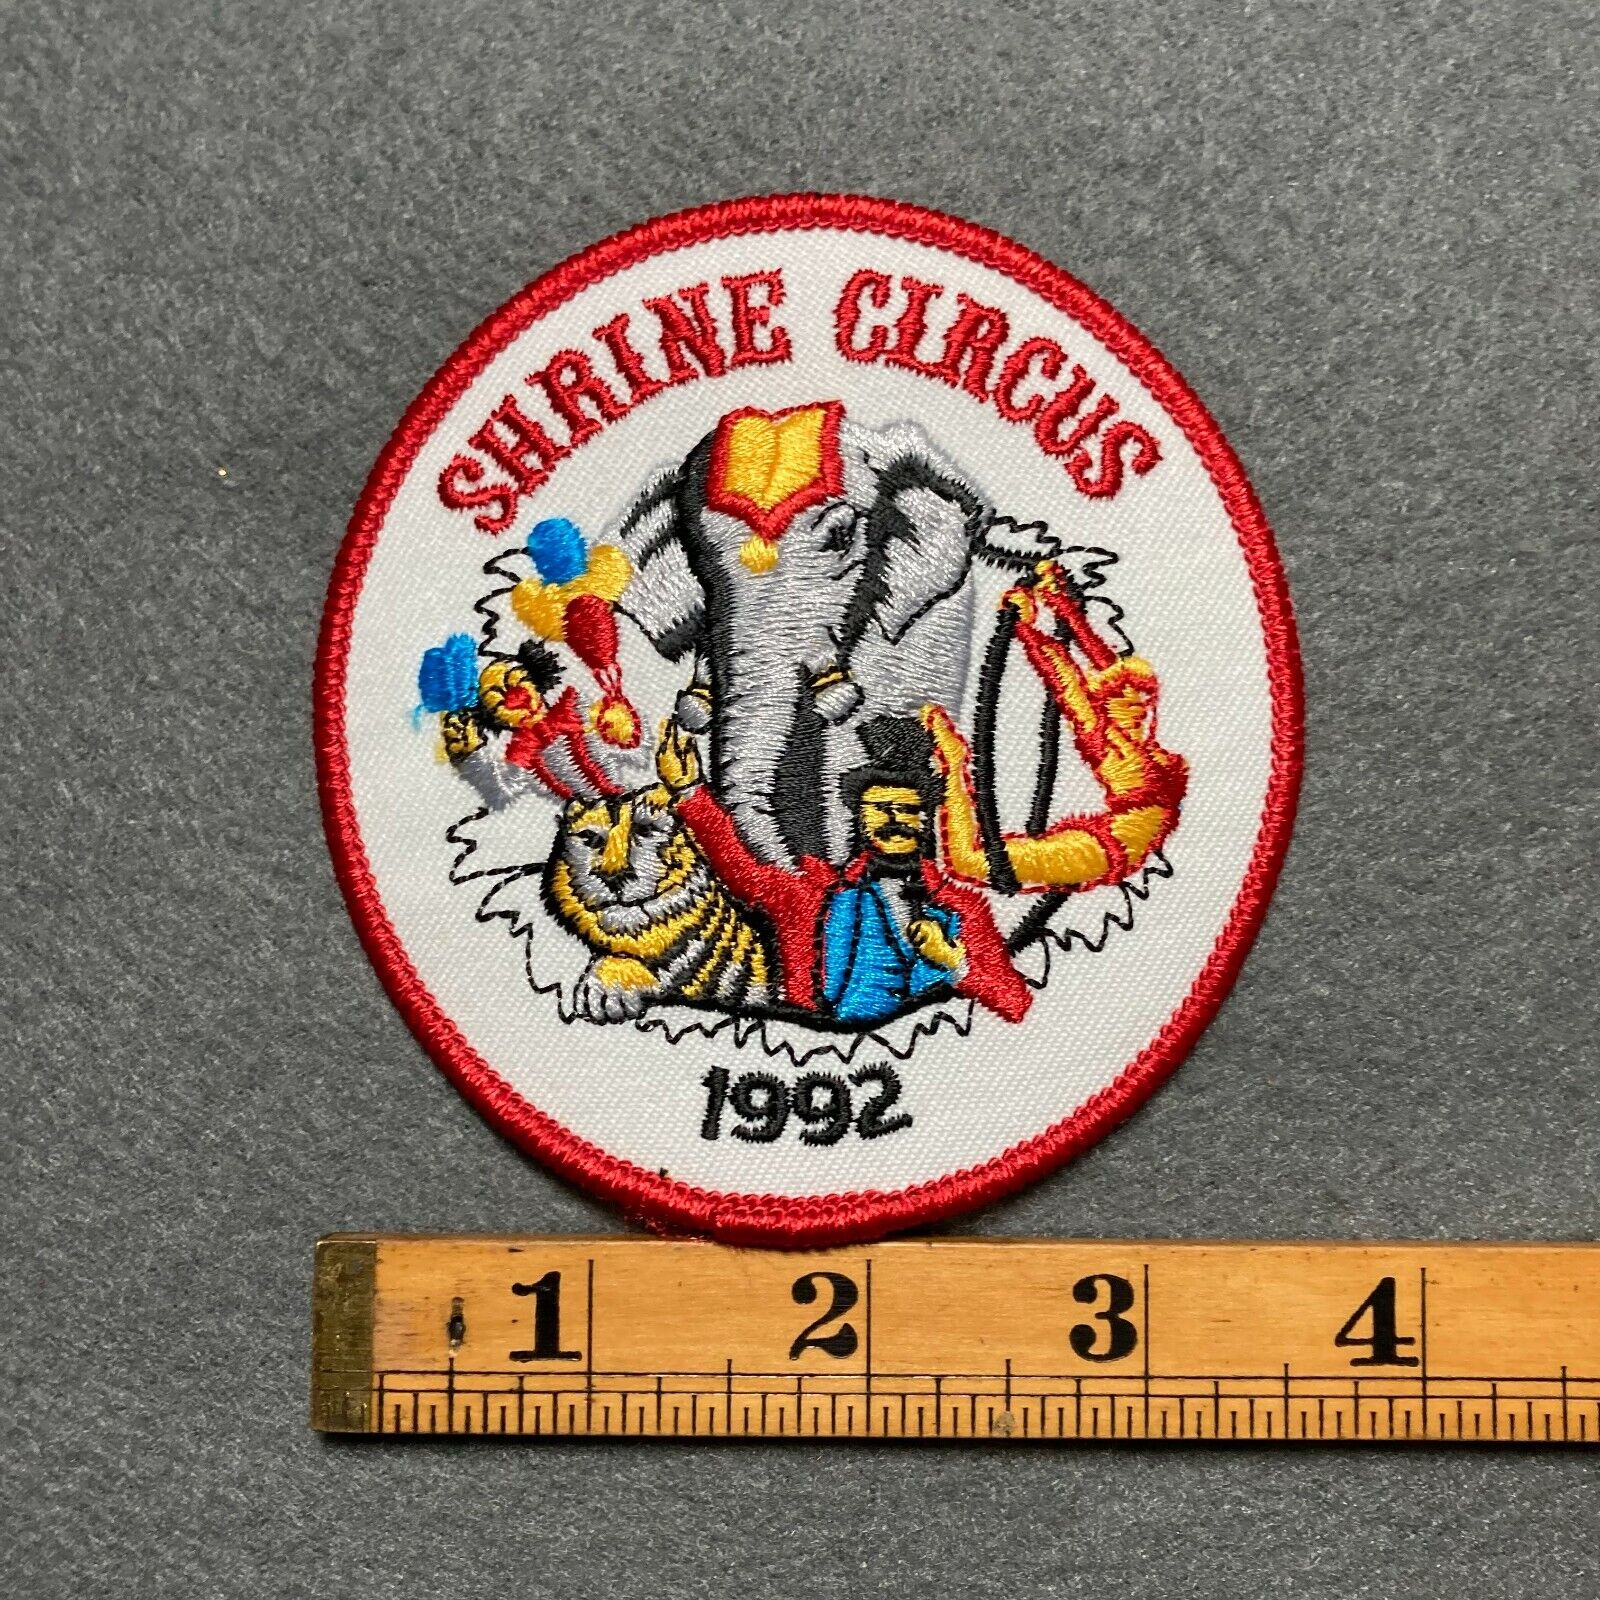 Vintage Shrine Circus 1992 Shriners Patch F2.